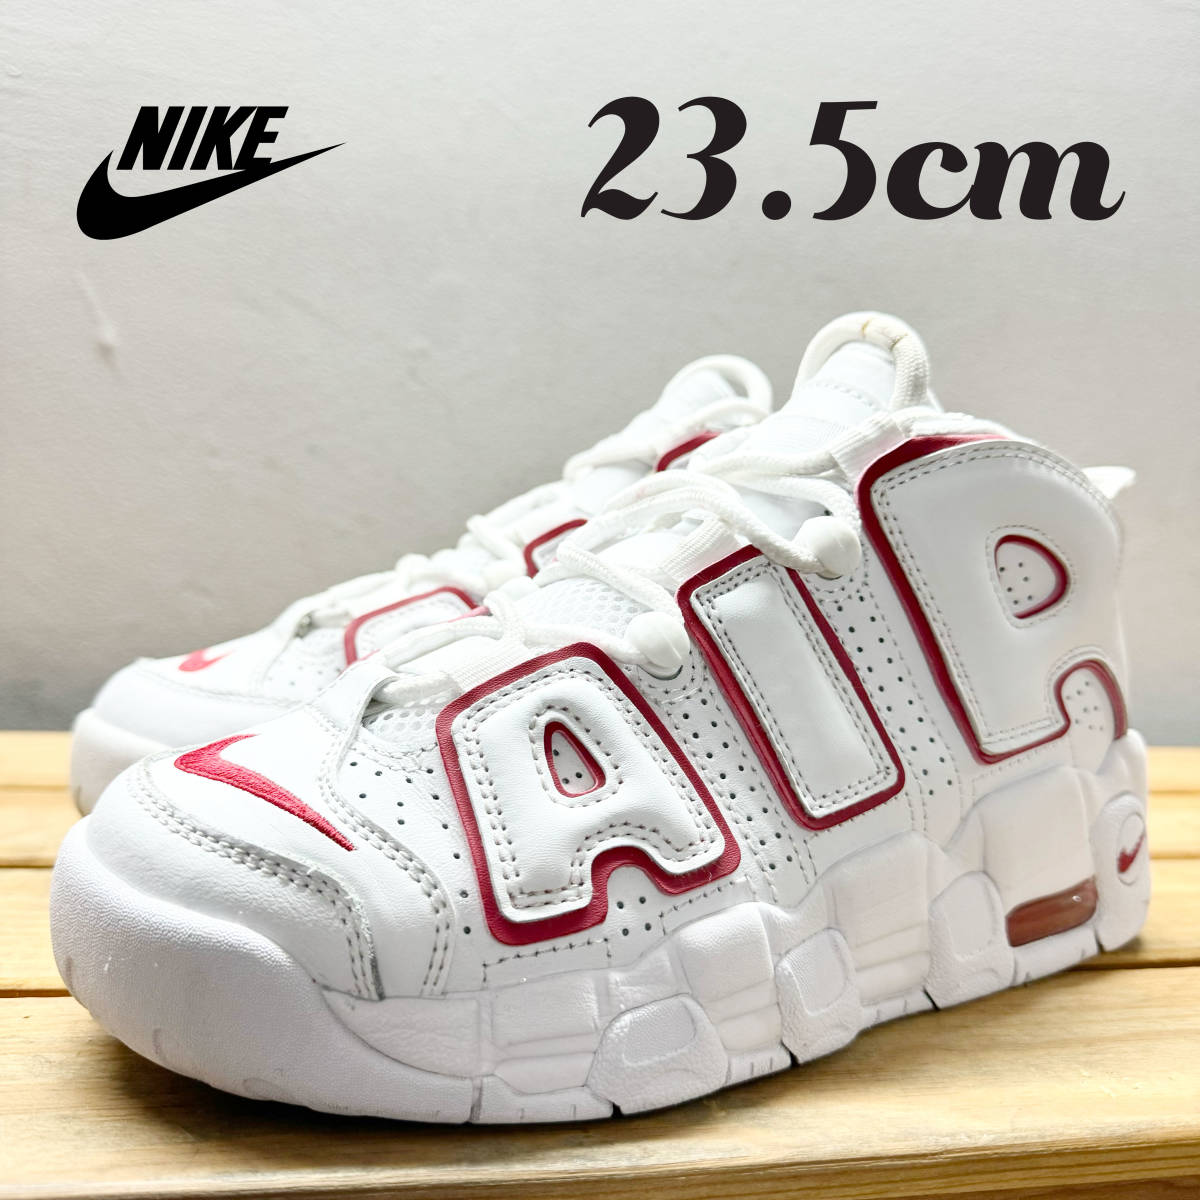 NIKE AIR MORE UPTEMPO モアテン スニーカー GS24.5-